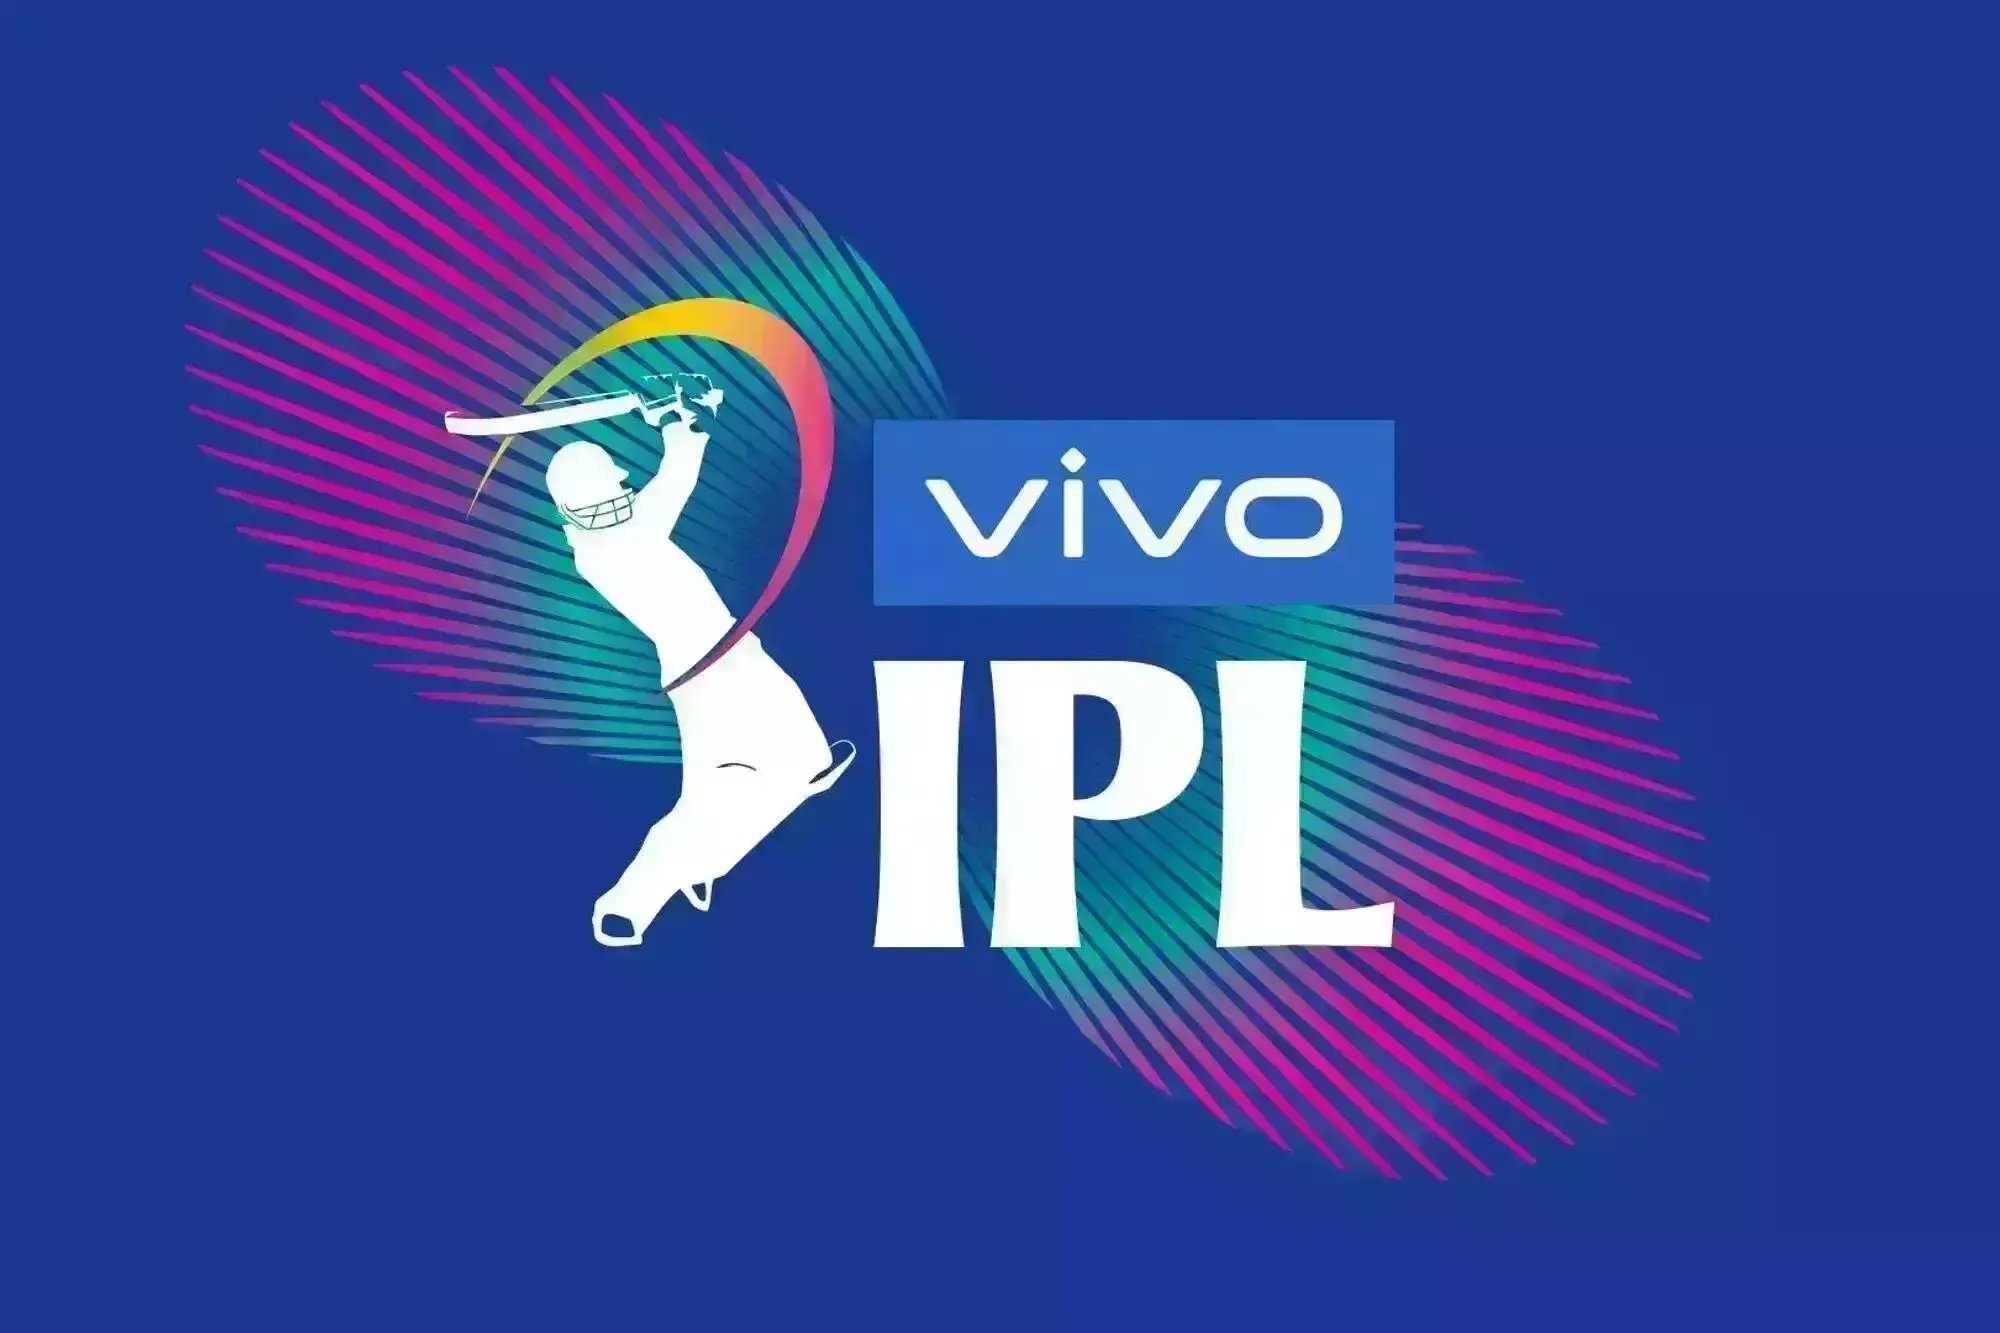 Vivo dropped as IPL title sponsors this year